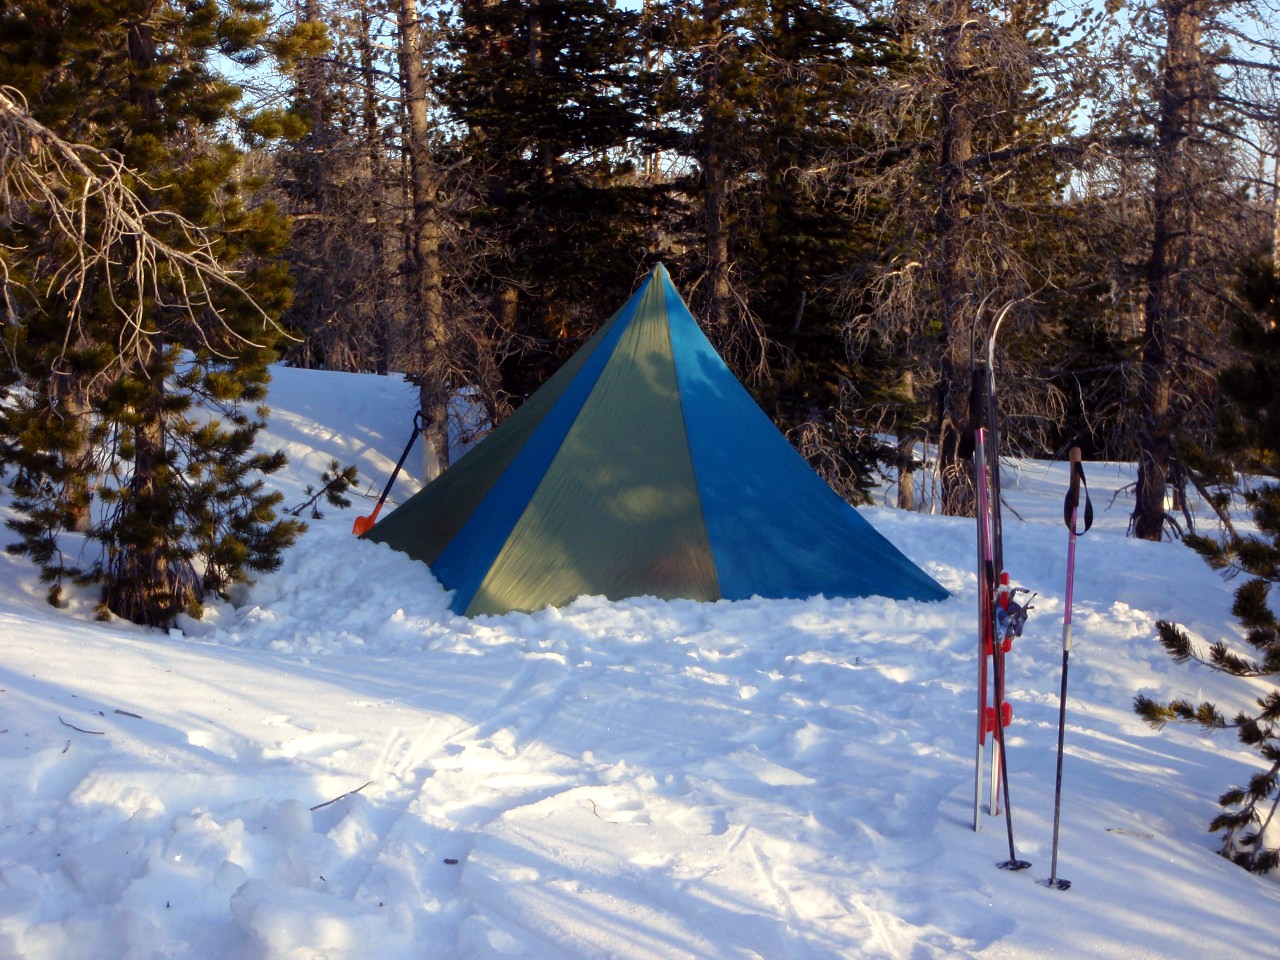 Next morning&#8212;my tent at our second camp